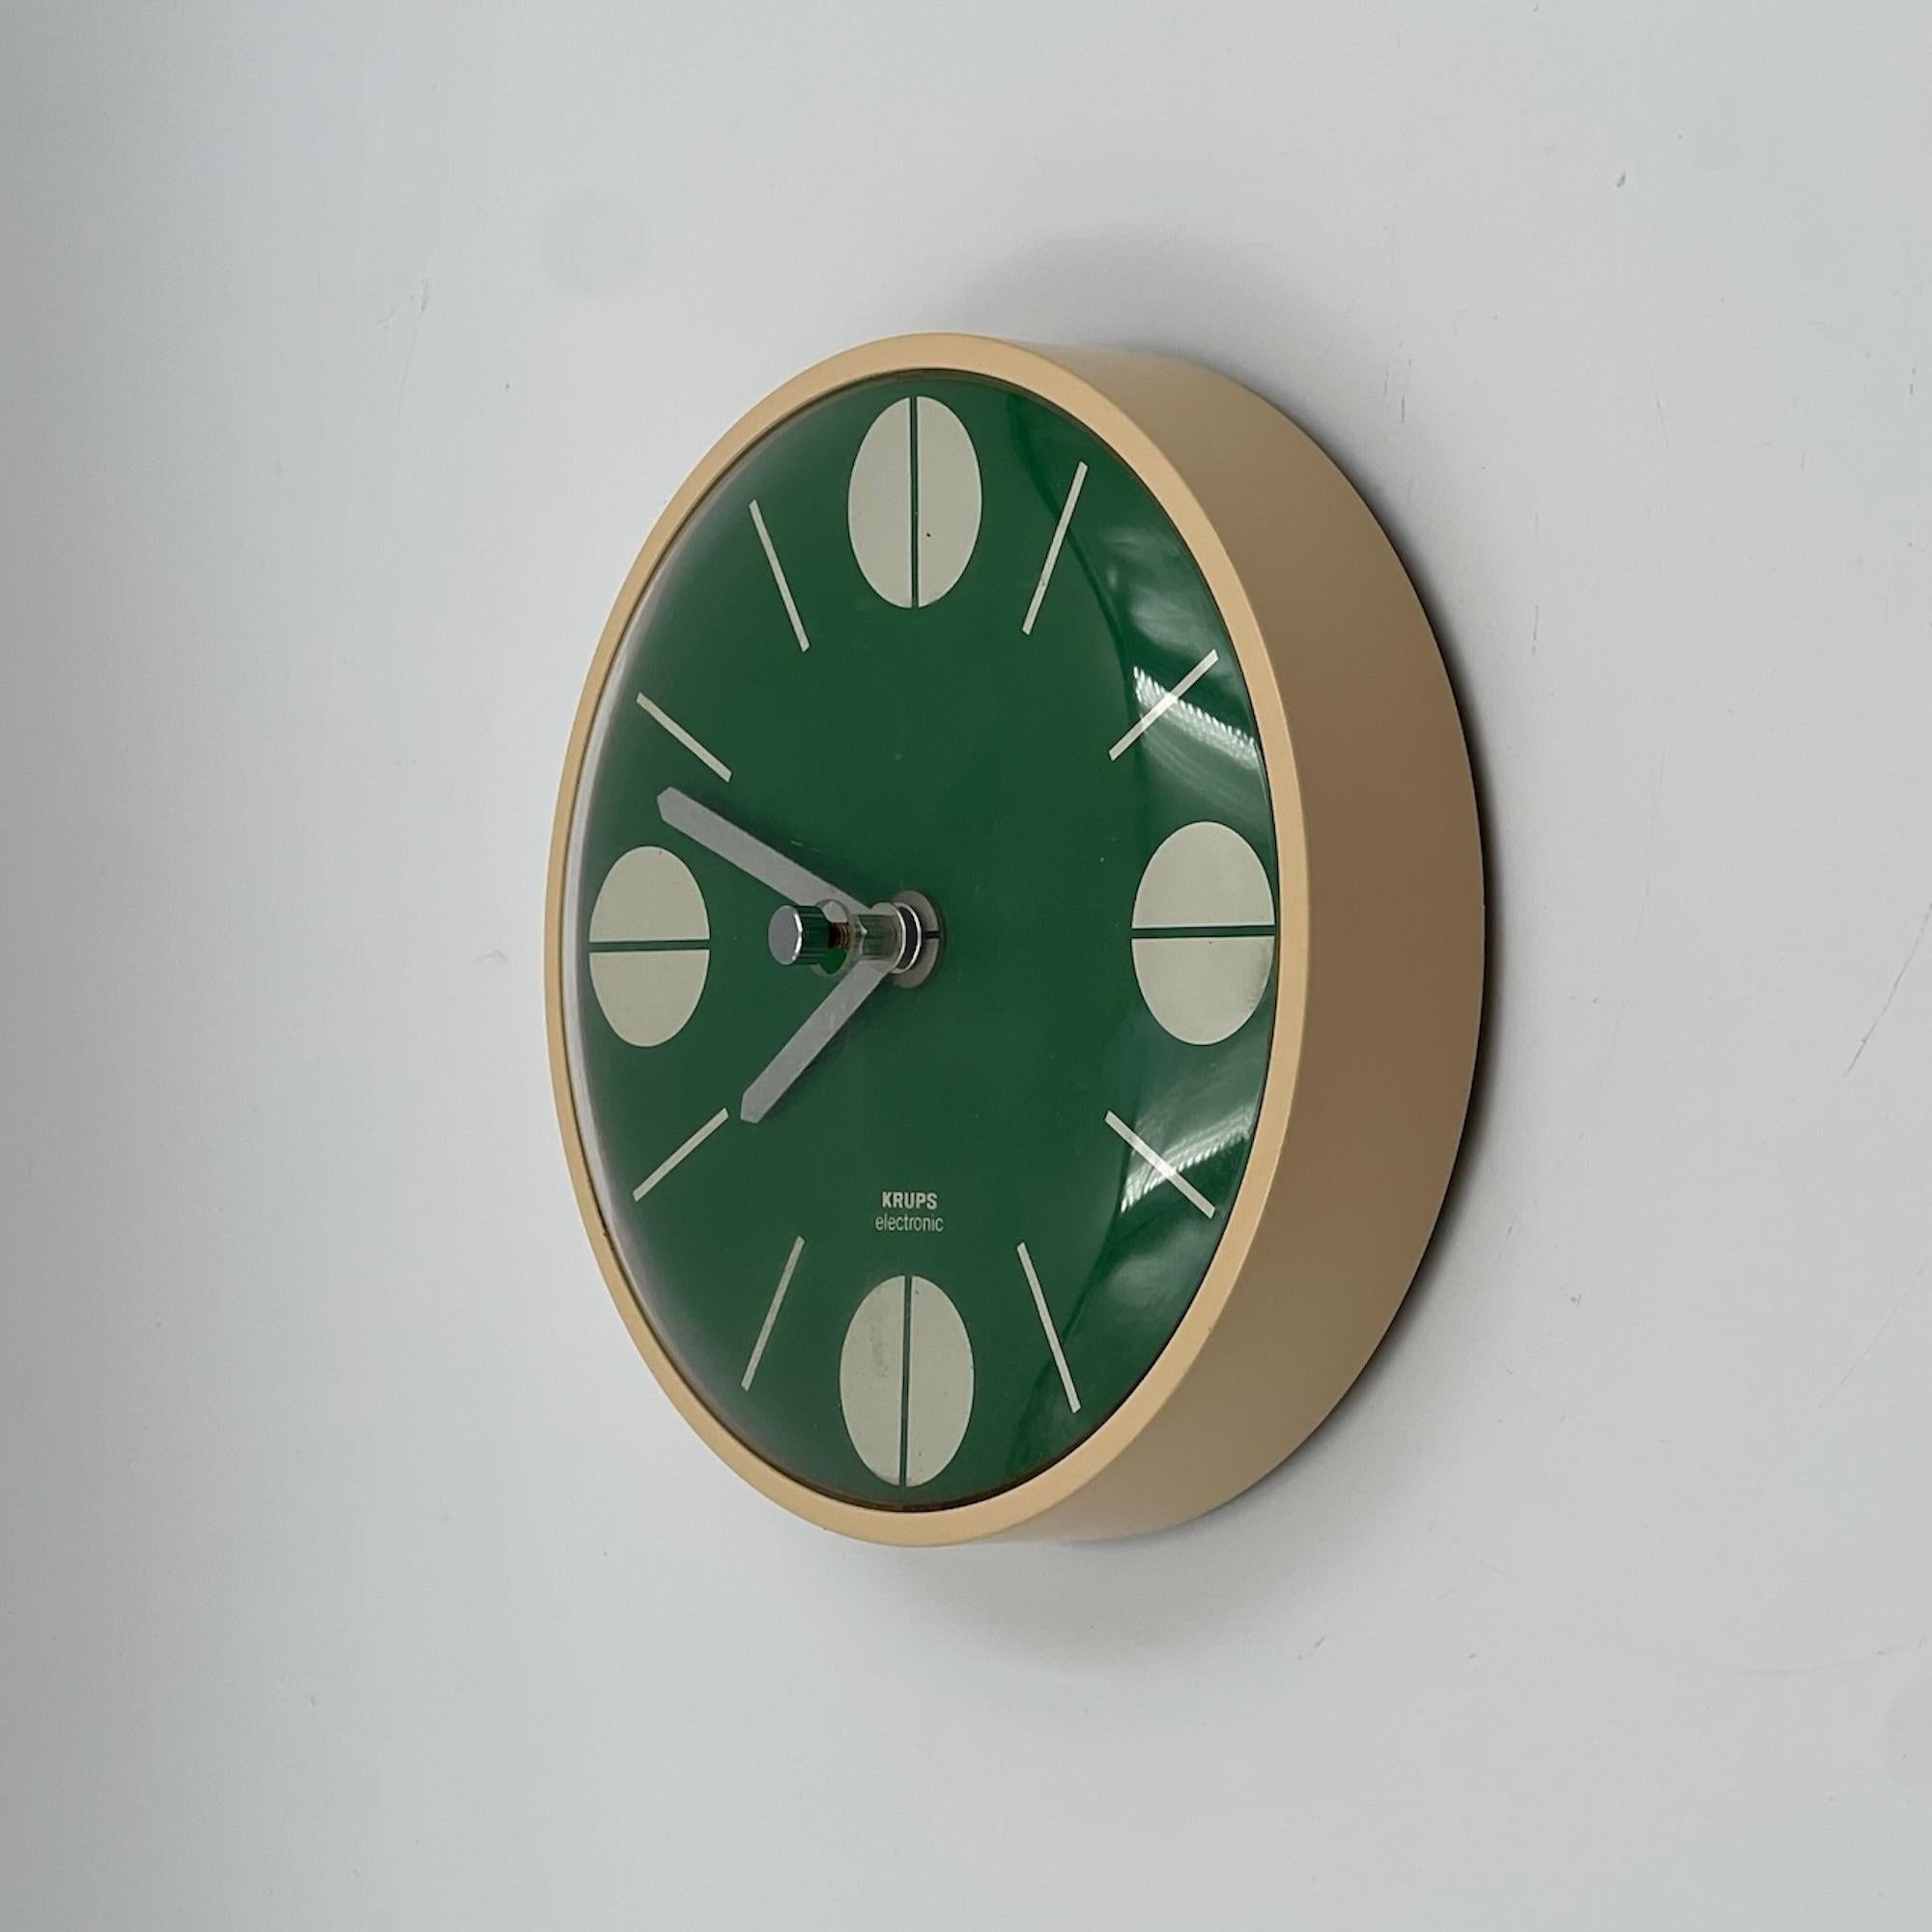 Late 20th Century Krups Germany Retro Green Wall Clock - Iconic 70s Space Age Design